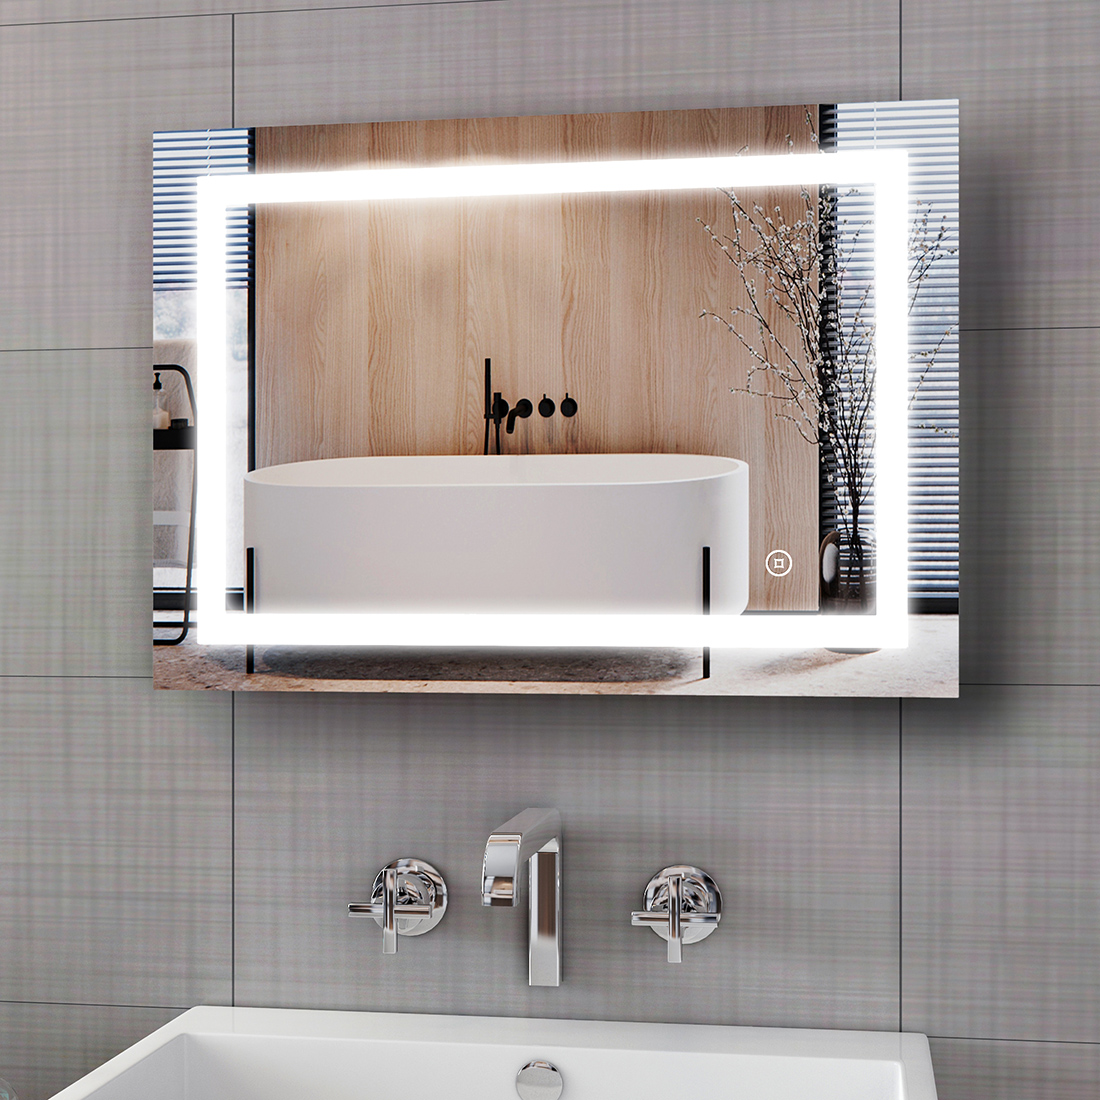 Duschdeluxe 1000x700 mm Illuminated LED Bathroom Mirror with Demister Bathroom Mirrors Light with Touch Switch Demister 